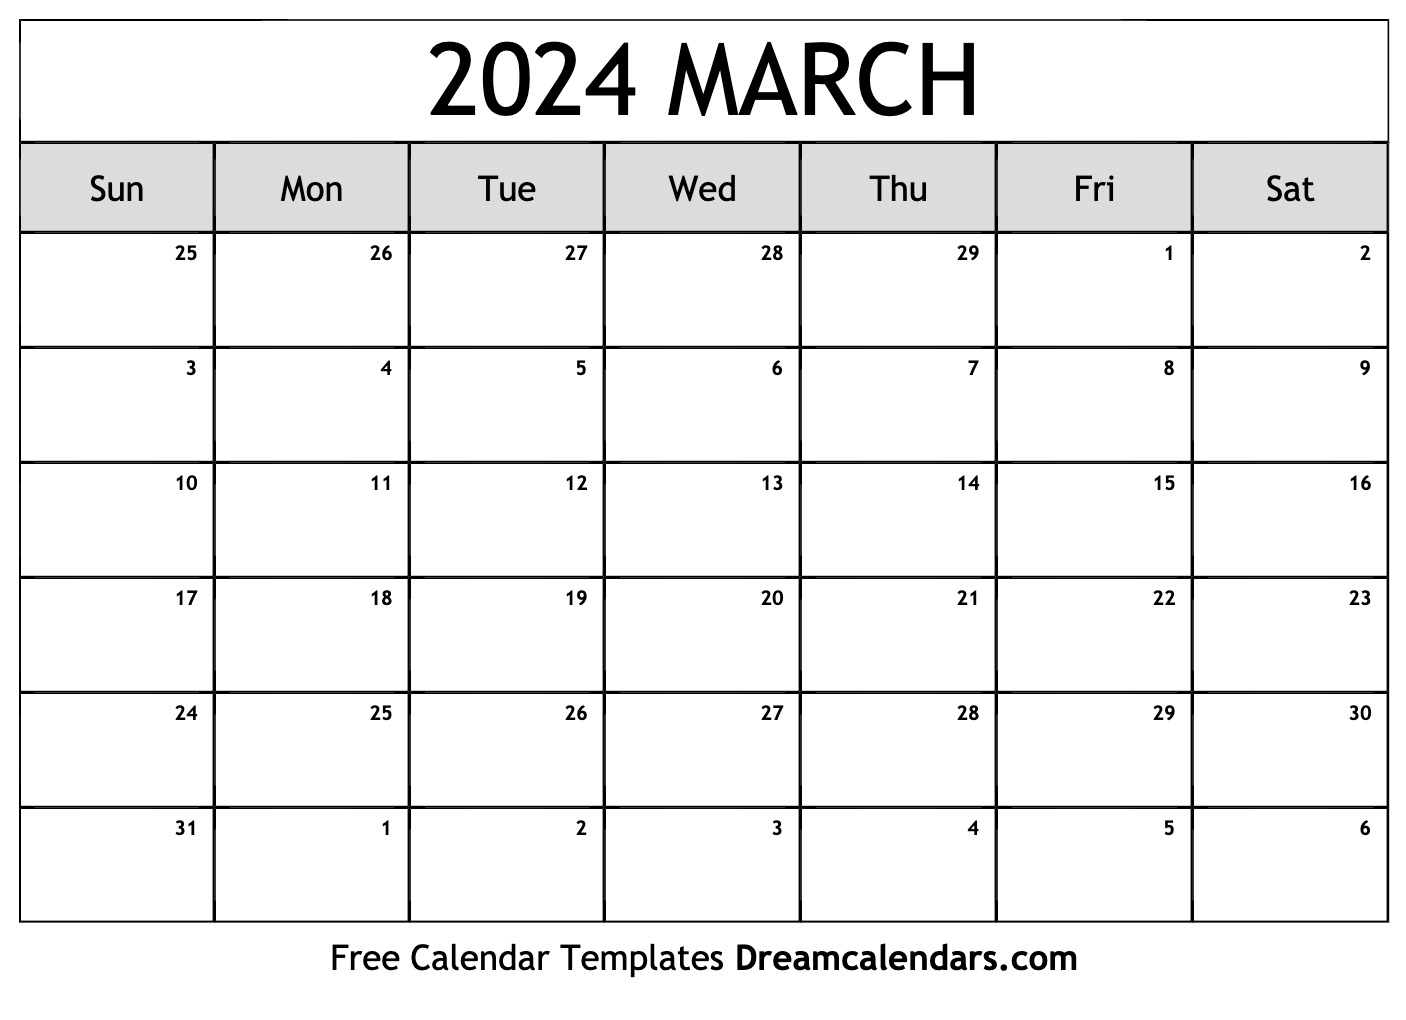 March 2024 Calendar | Free Blank Printable With Holidays for Blank March 2024 Calendar Printable